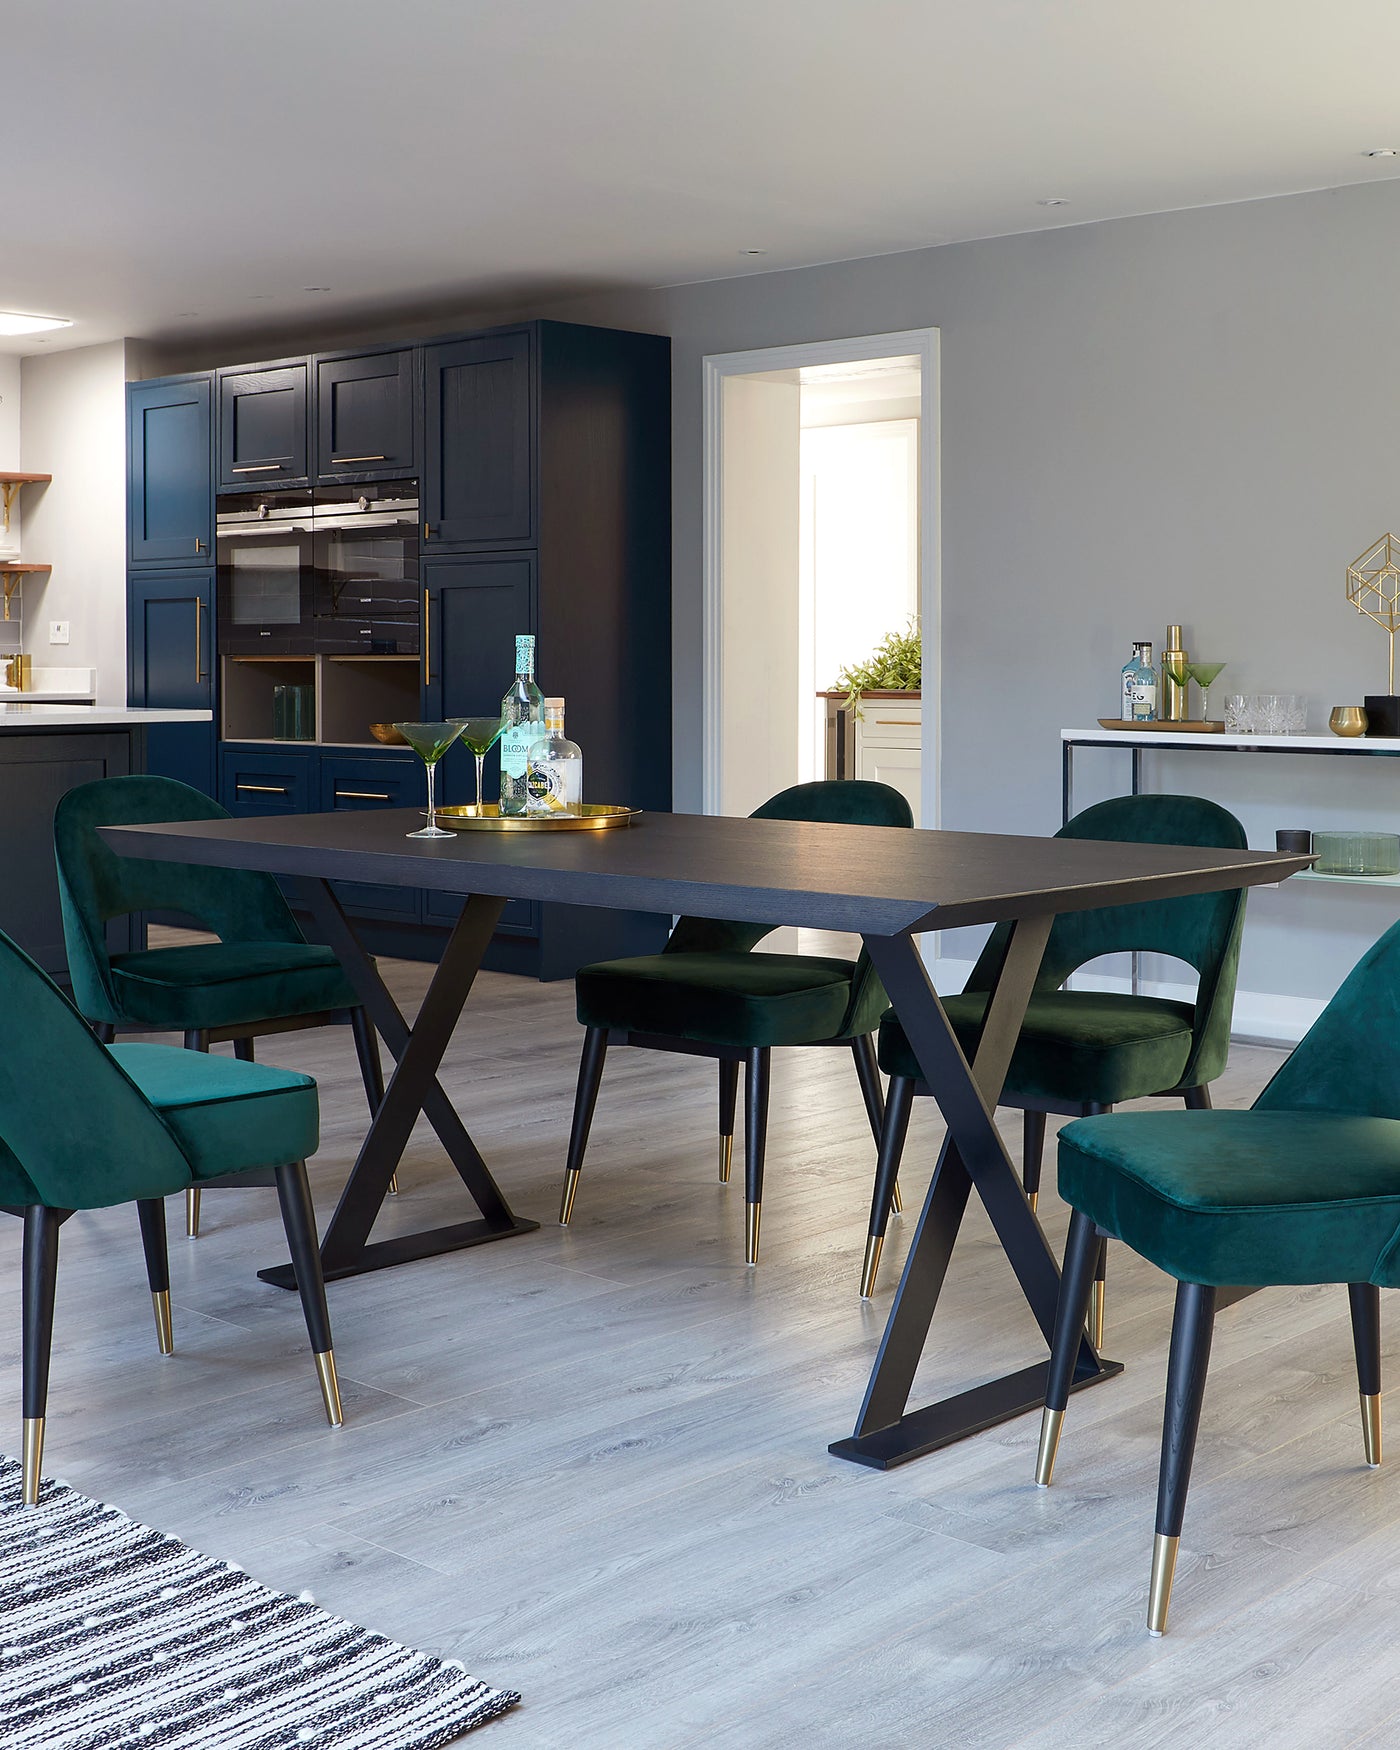 Modern dining room furniture featuring a dark wood table with a rectangular top and angular metal legs, accompanied by six plush, green velvet chairs with black tapered legs and gold feet caps. A minimalist black sideboard with kitchen cabinets in the background completes the scene.